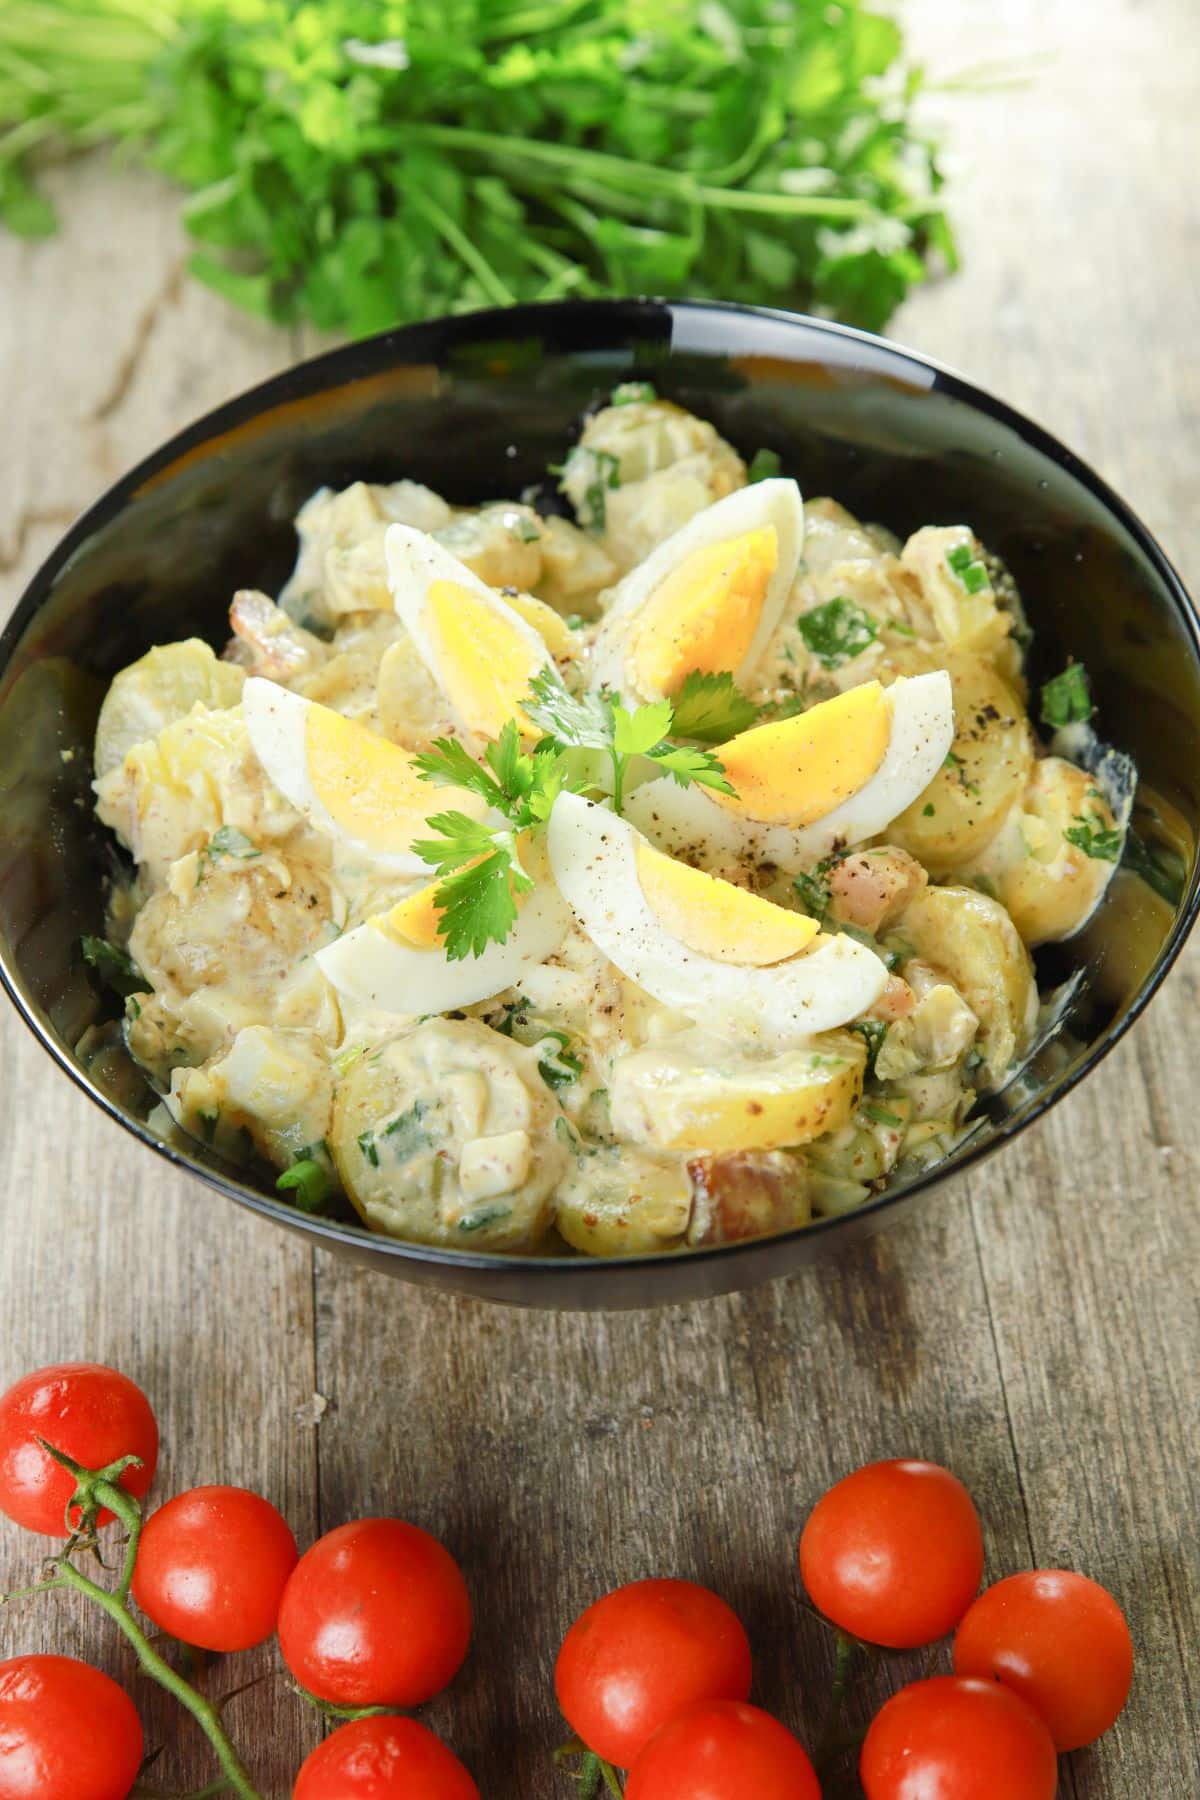 black bowl of potato salad by cherry tomatoes and fresh herbs